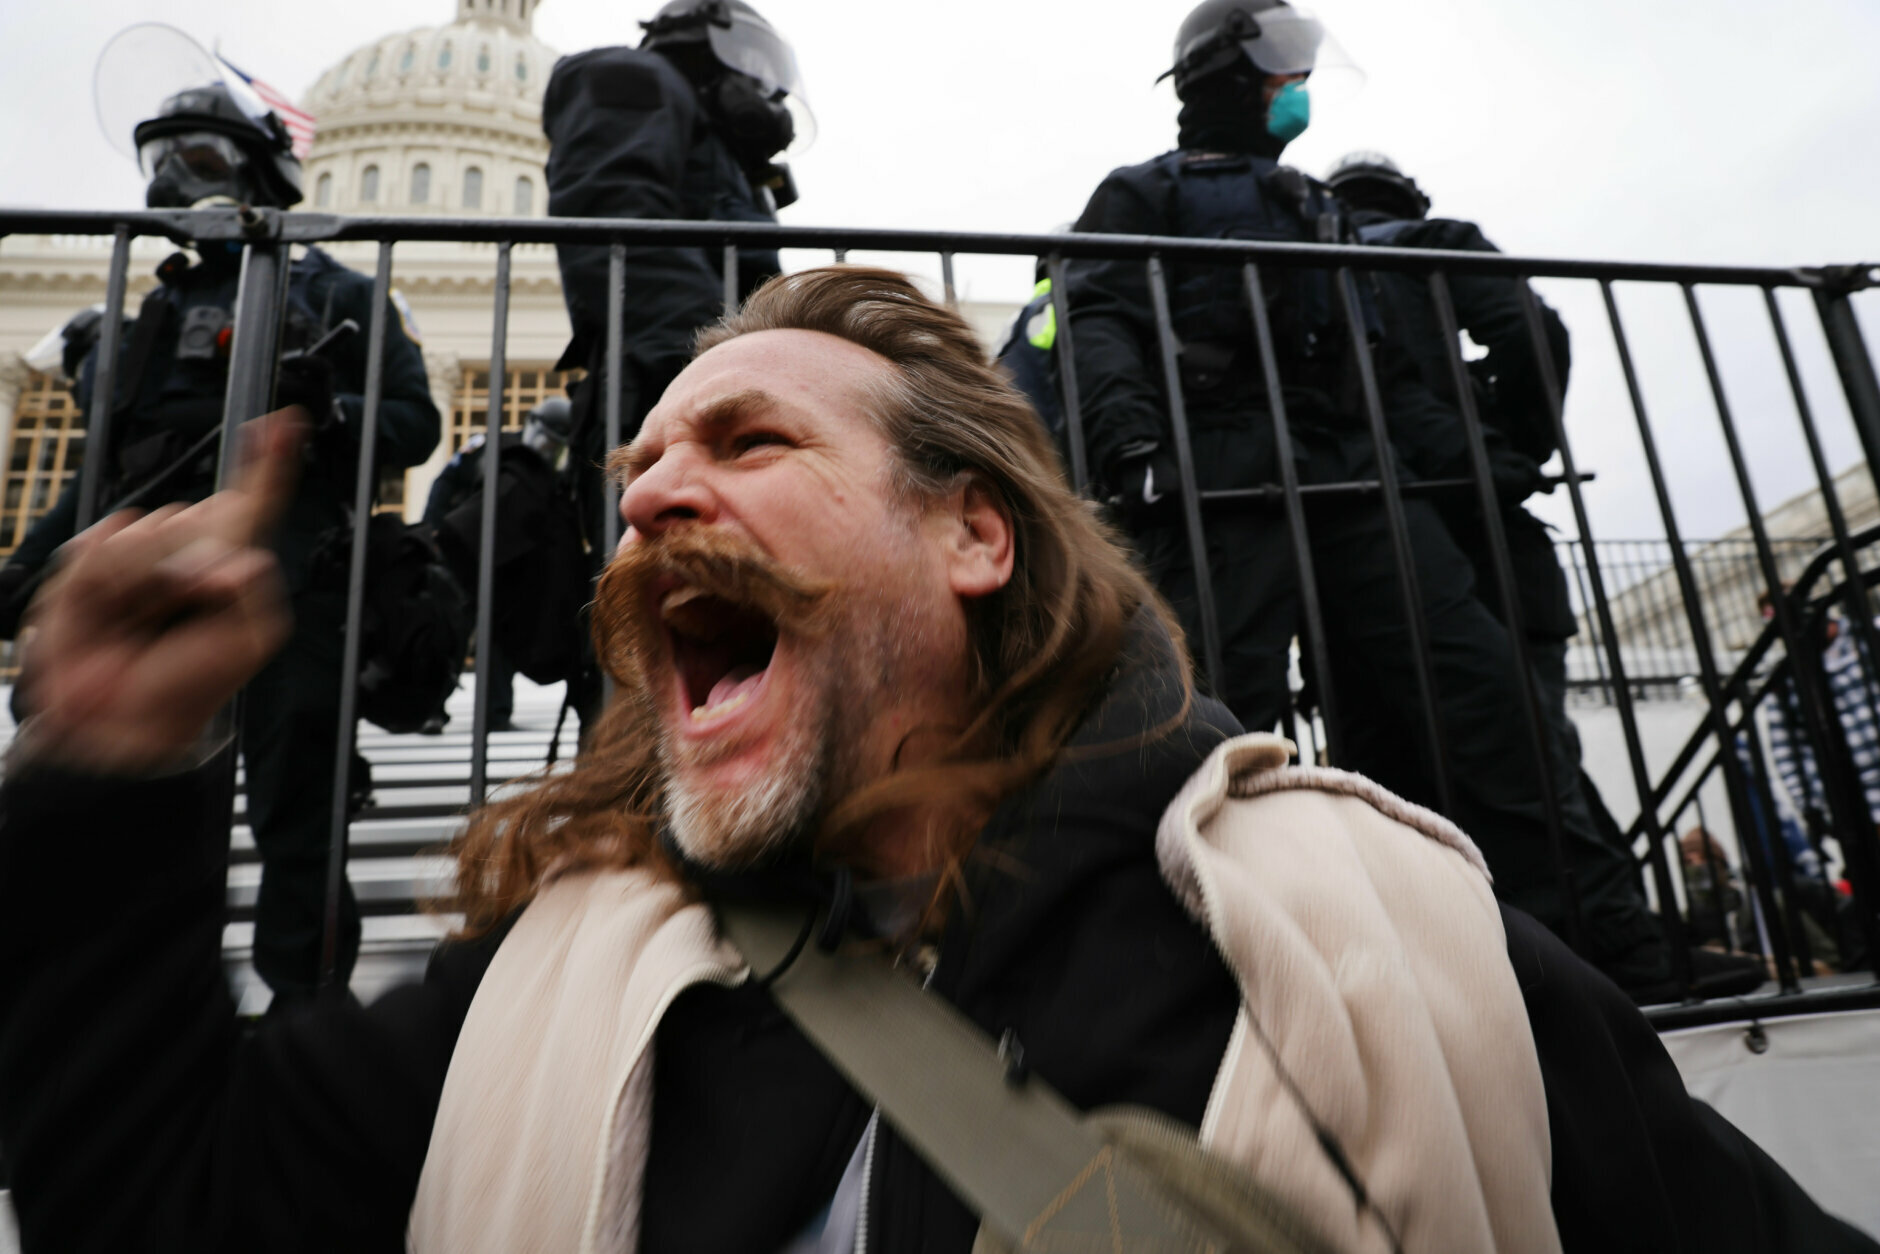 WASHINGTON, DC - JANUARY 06: Trump supporters gather outside the U.S. Capitol building following a "Stop the Steal" rally on January 06, 2021 in Washington, DC. A pro-Trump mob stormed the Capitol earlier, breaking windows and clashing with police officers. Trump supporters gathered in the nation's capital to protest the ratification of President-elect Joe Biden's Electoral College victory over President Donald Trump in the 2020 election. (Photo by Spencer Platt/Getty Images)